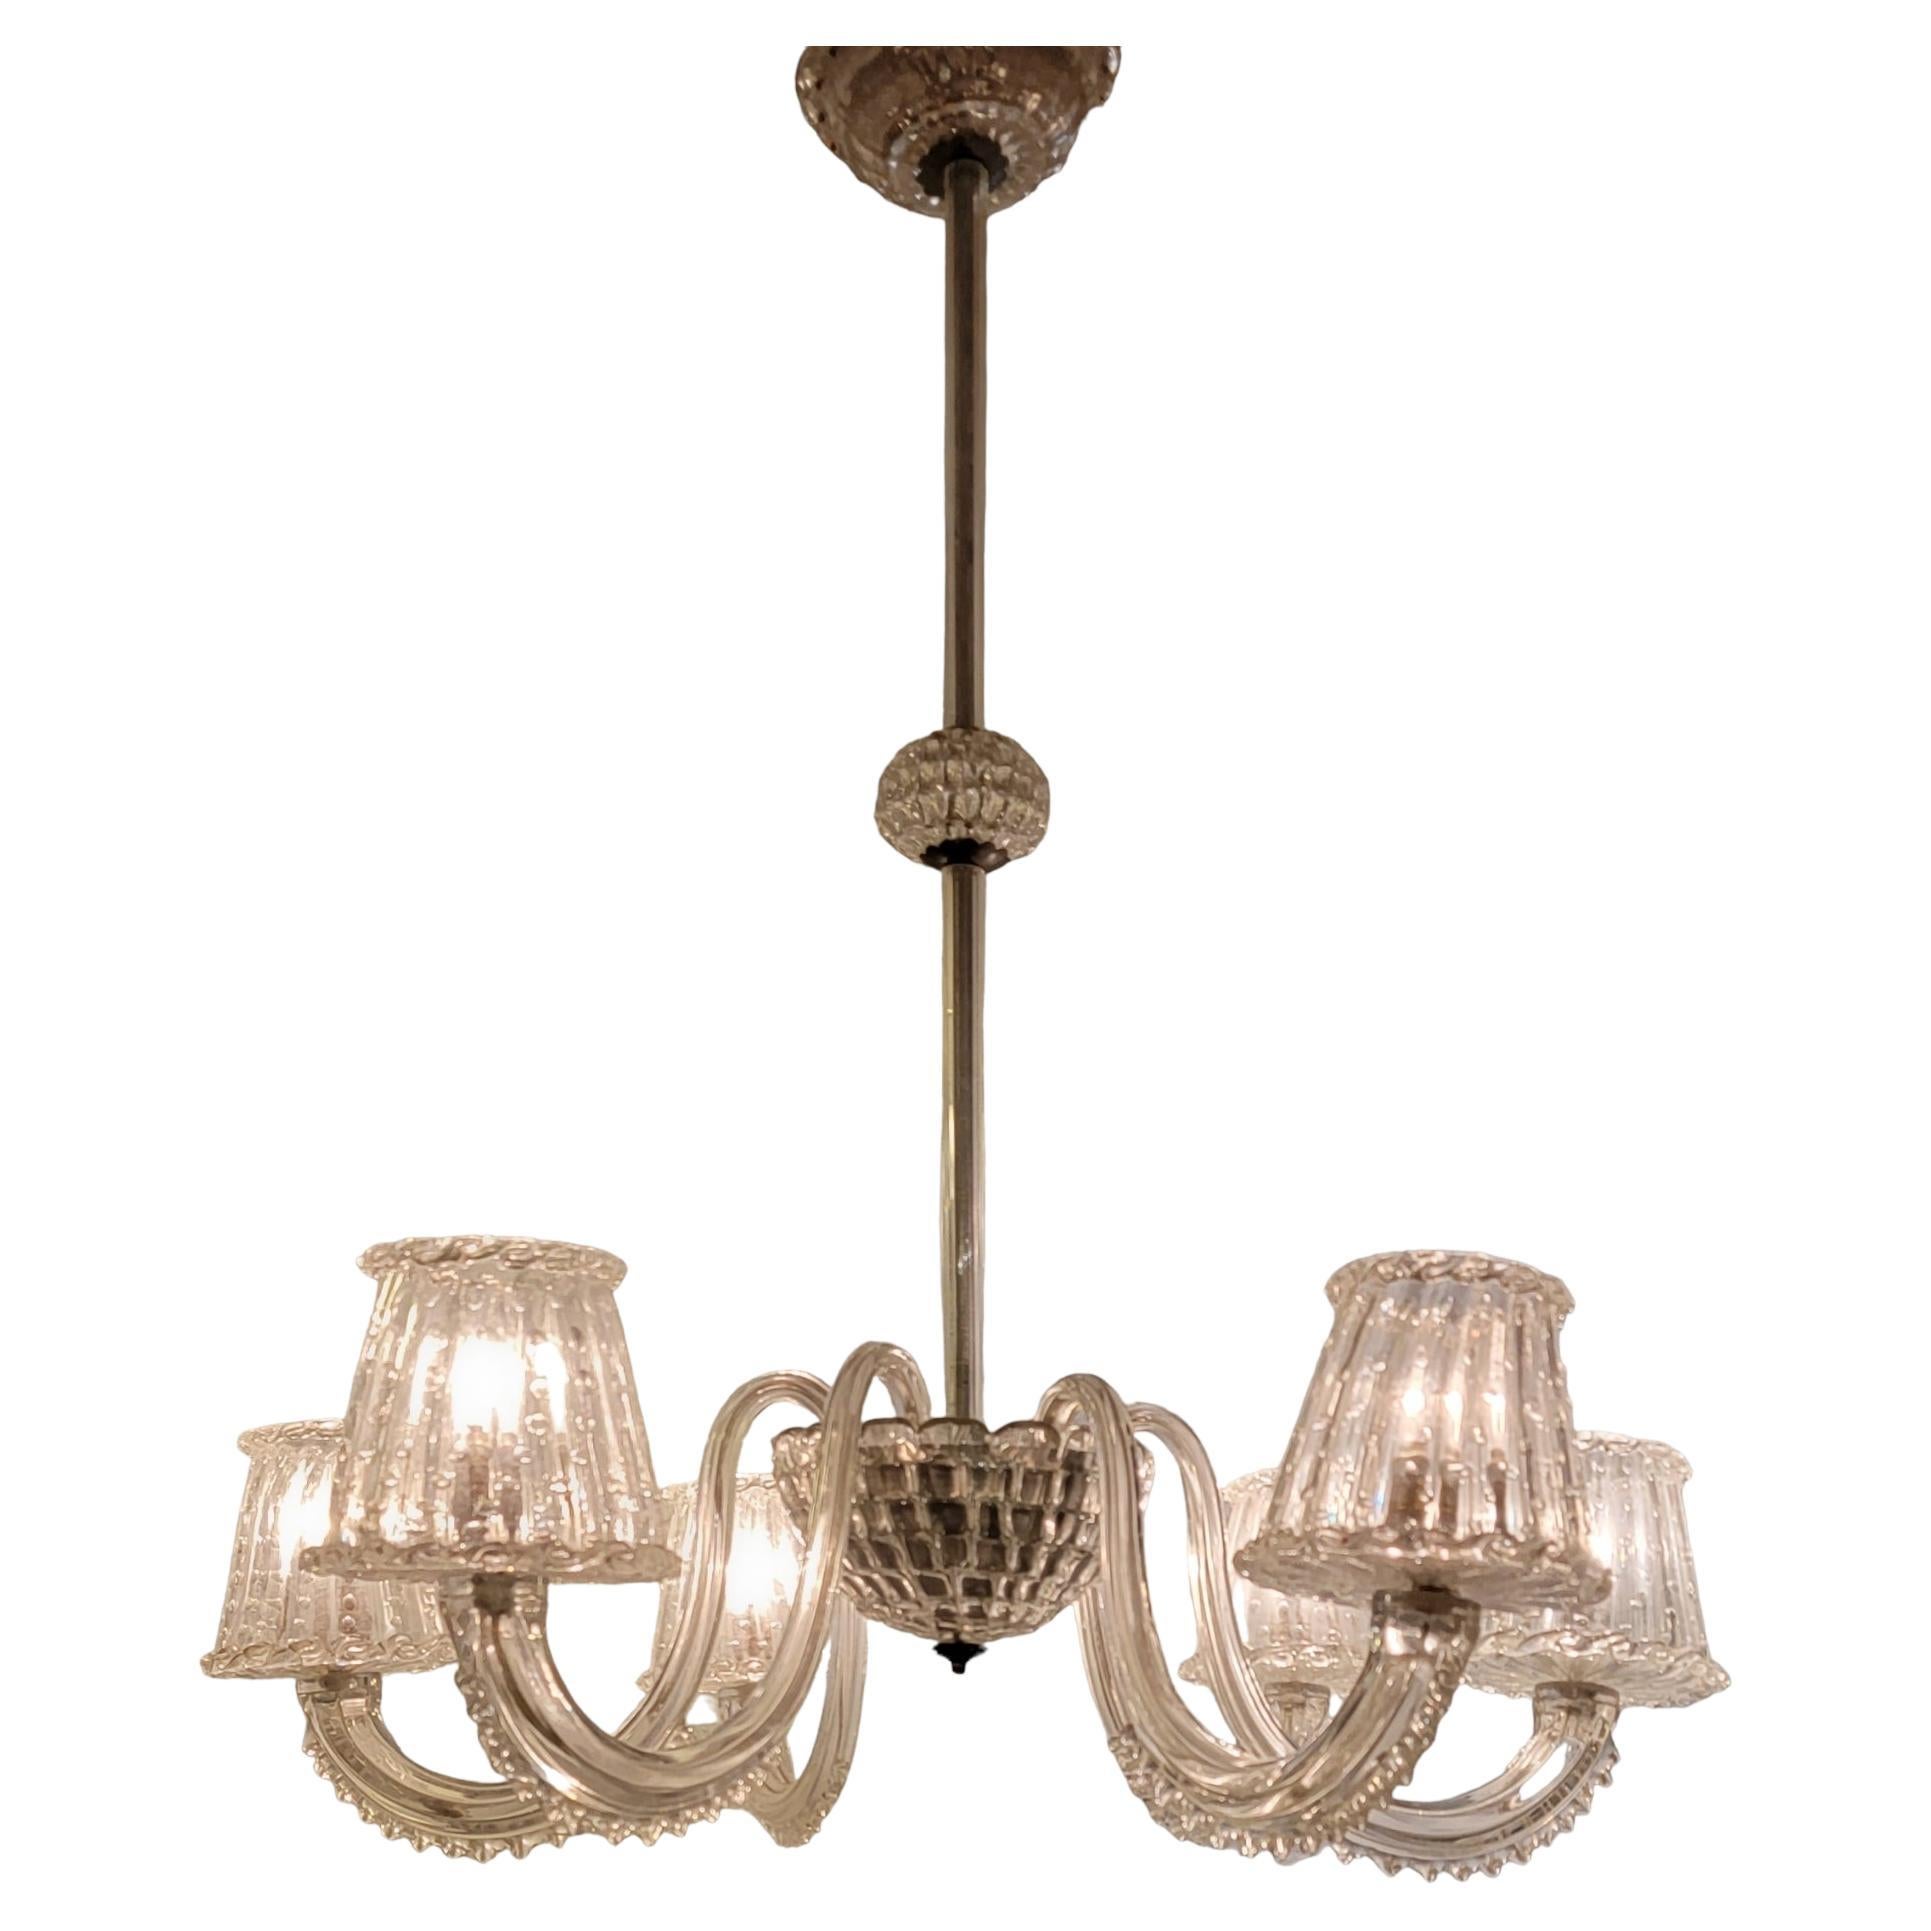 1940s Venitian Vintage Murano Glass Chandelier by Borovier